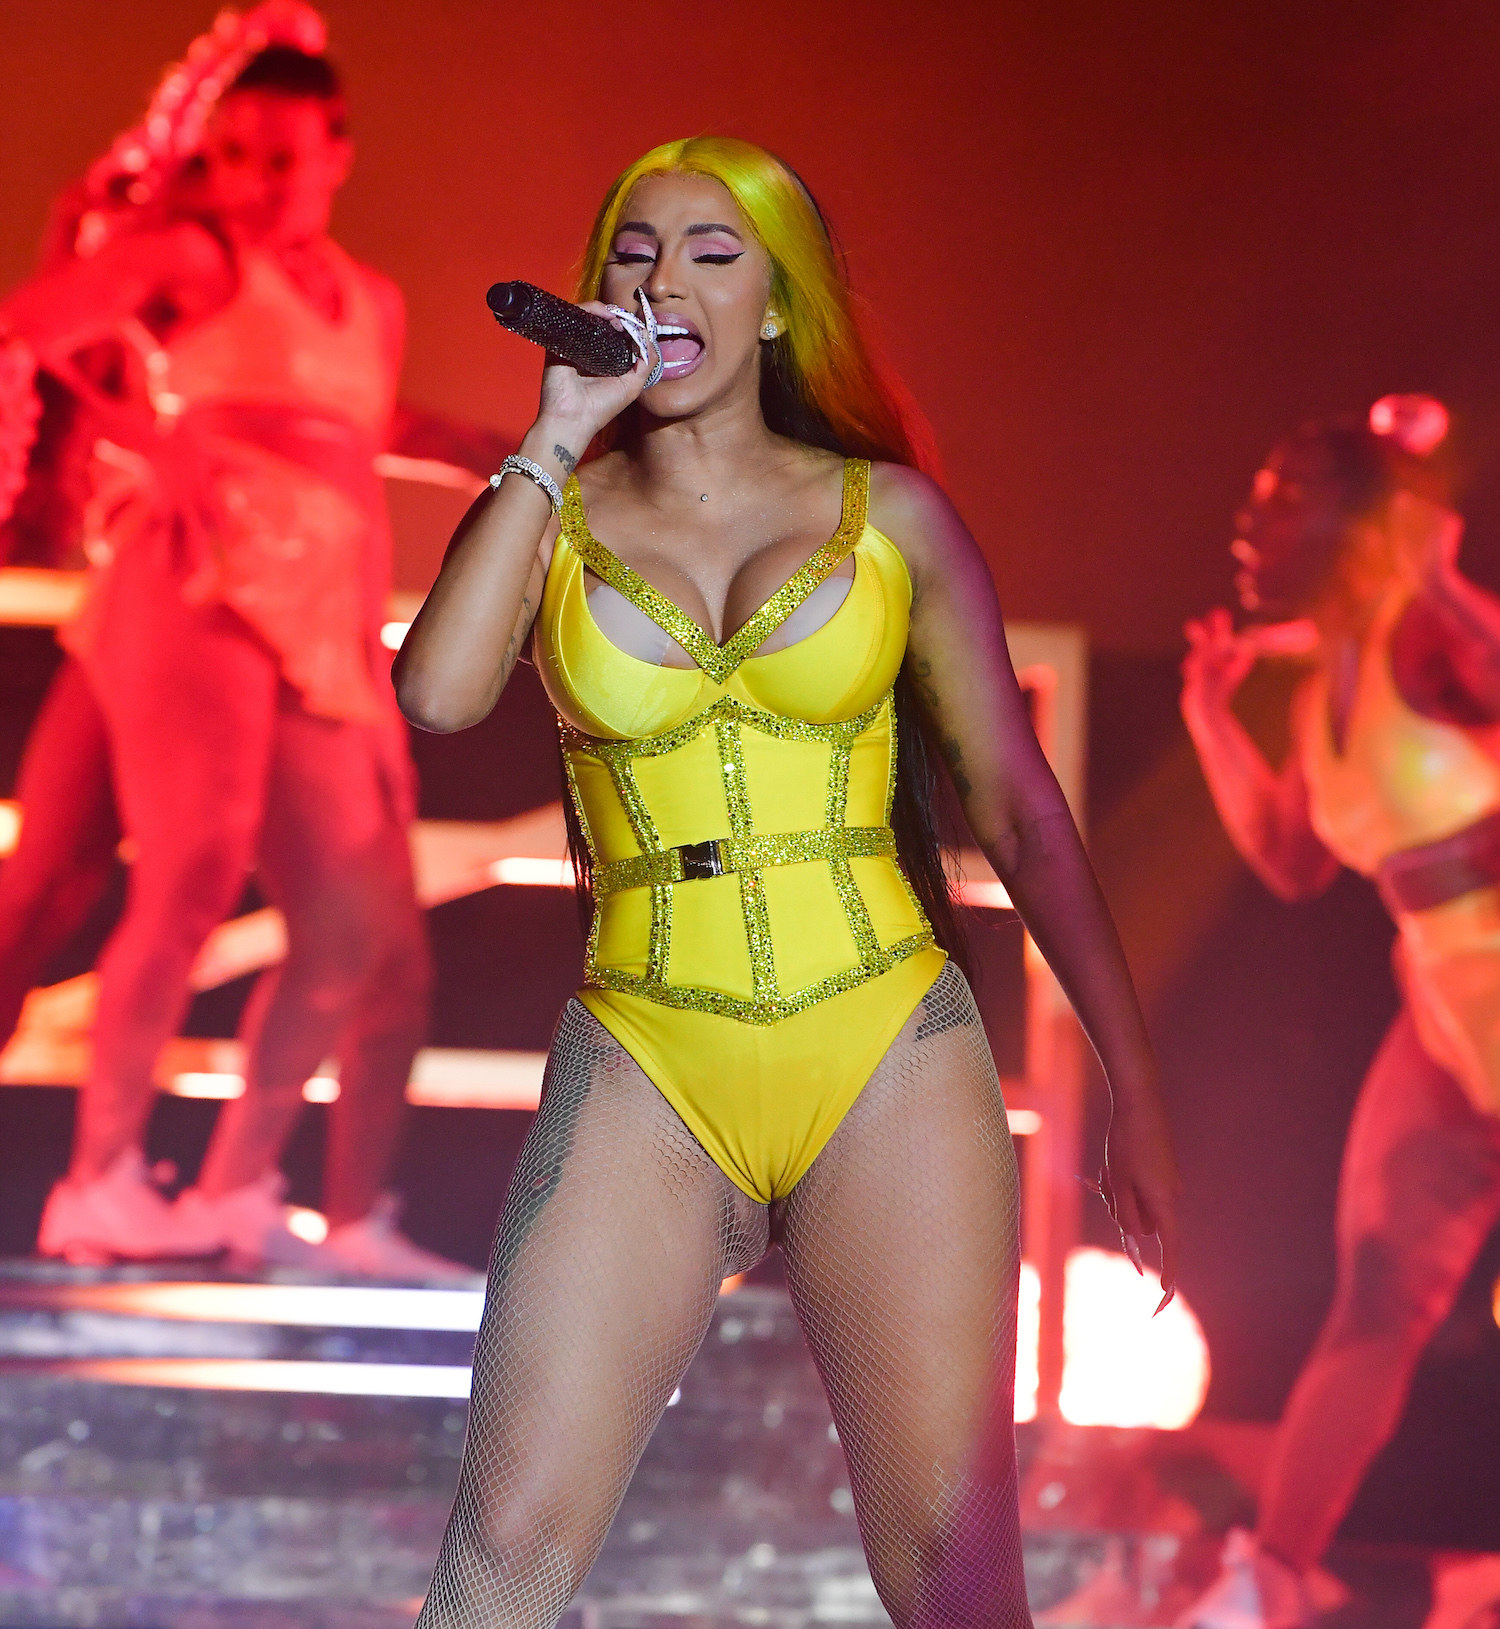 Cardi B performs at Vewtopia Music Festival 2020 in a bedazzled bodysuit and long hair
